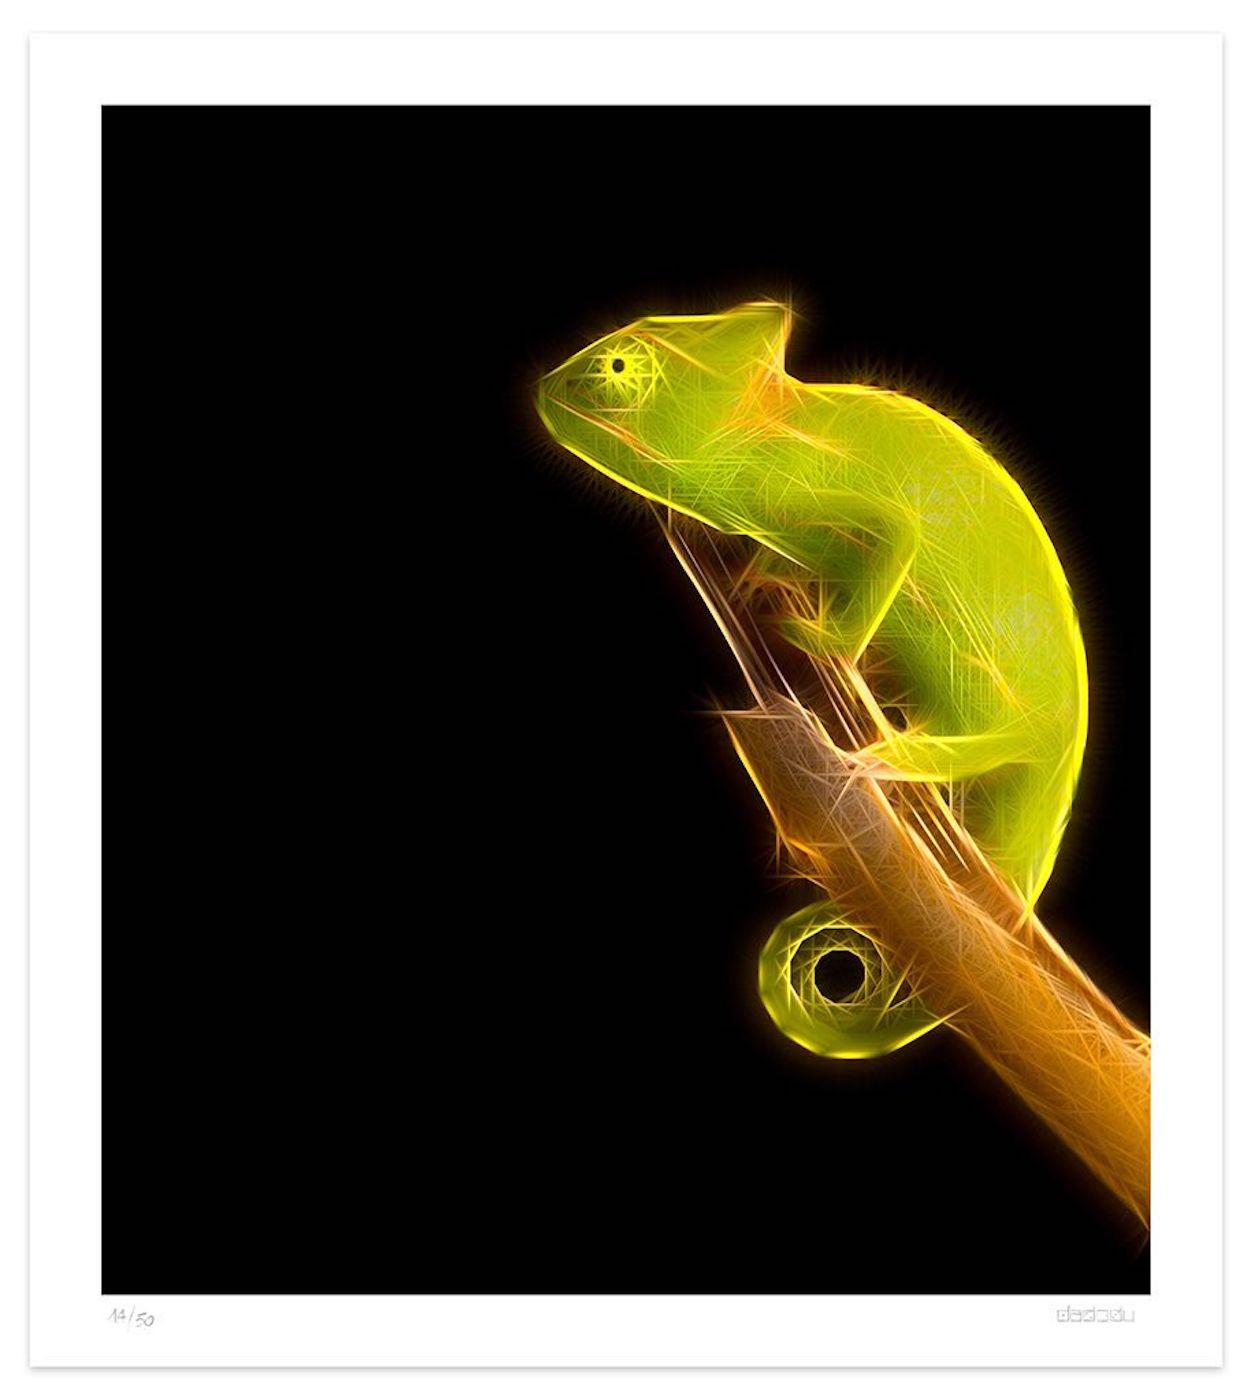 Image dimensions: 70 x 61.8 cm.

Leo is an original giclée print realized by the contemporary artist Dadodu in 2019.

This original artwork represents a chameleon with neon lights on a black background.

Hand-signed on the lower right "Dadodu" and